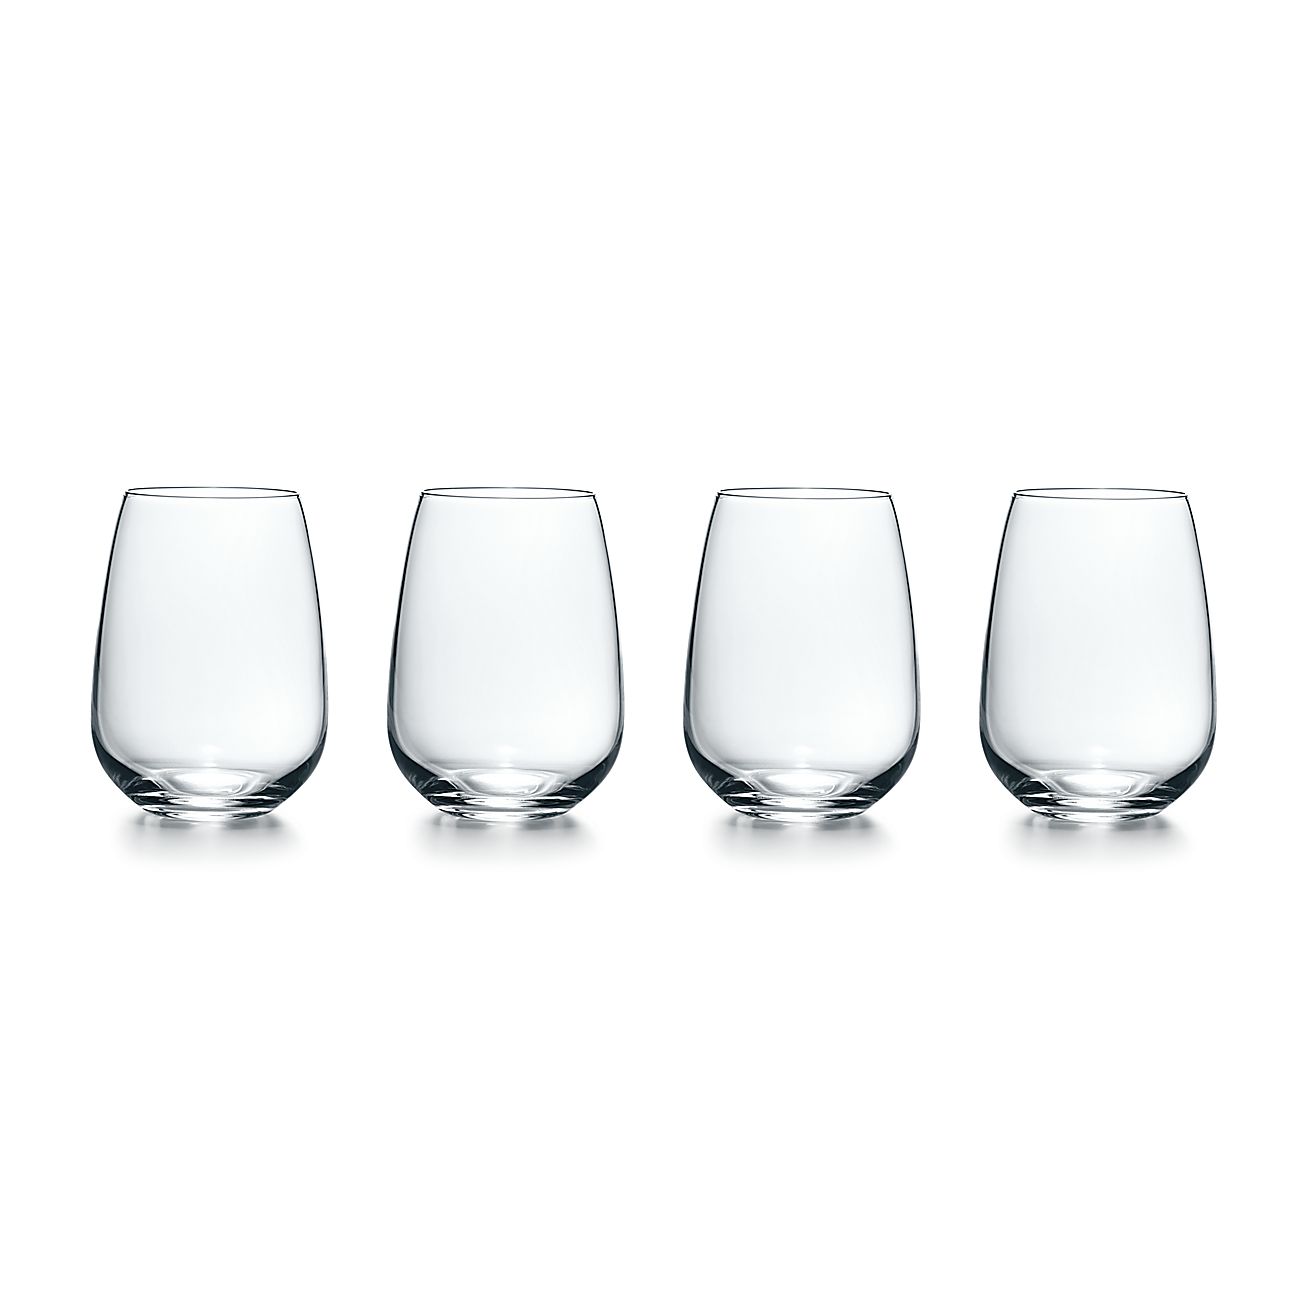 Tiffany Home Essentials Stemless White Wine Glasses in Crystal Glass, Set  of Two